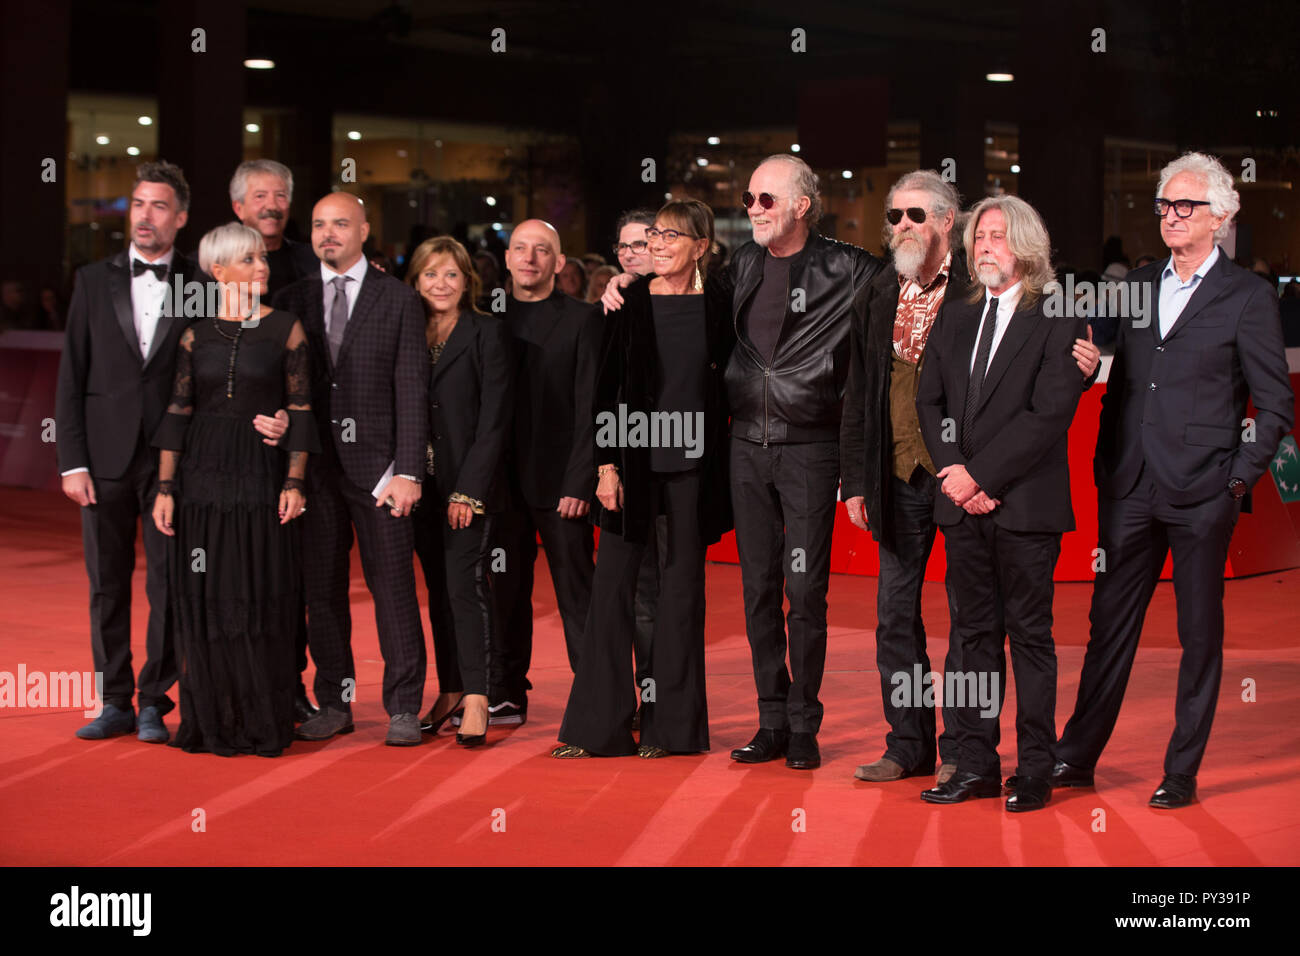 Red Carpet of the documentary 'Vero live, Francesco De Gregori' on October 24, 2018 at the Rome Film Fest (Photo by Matteo Nardone / Pacific Press) Stock Photo